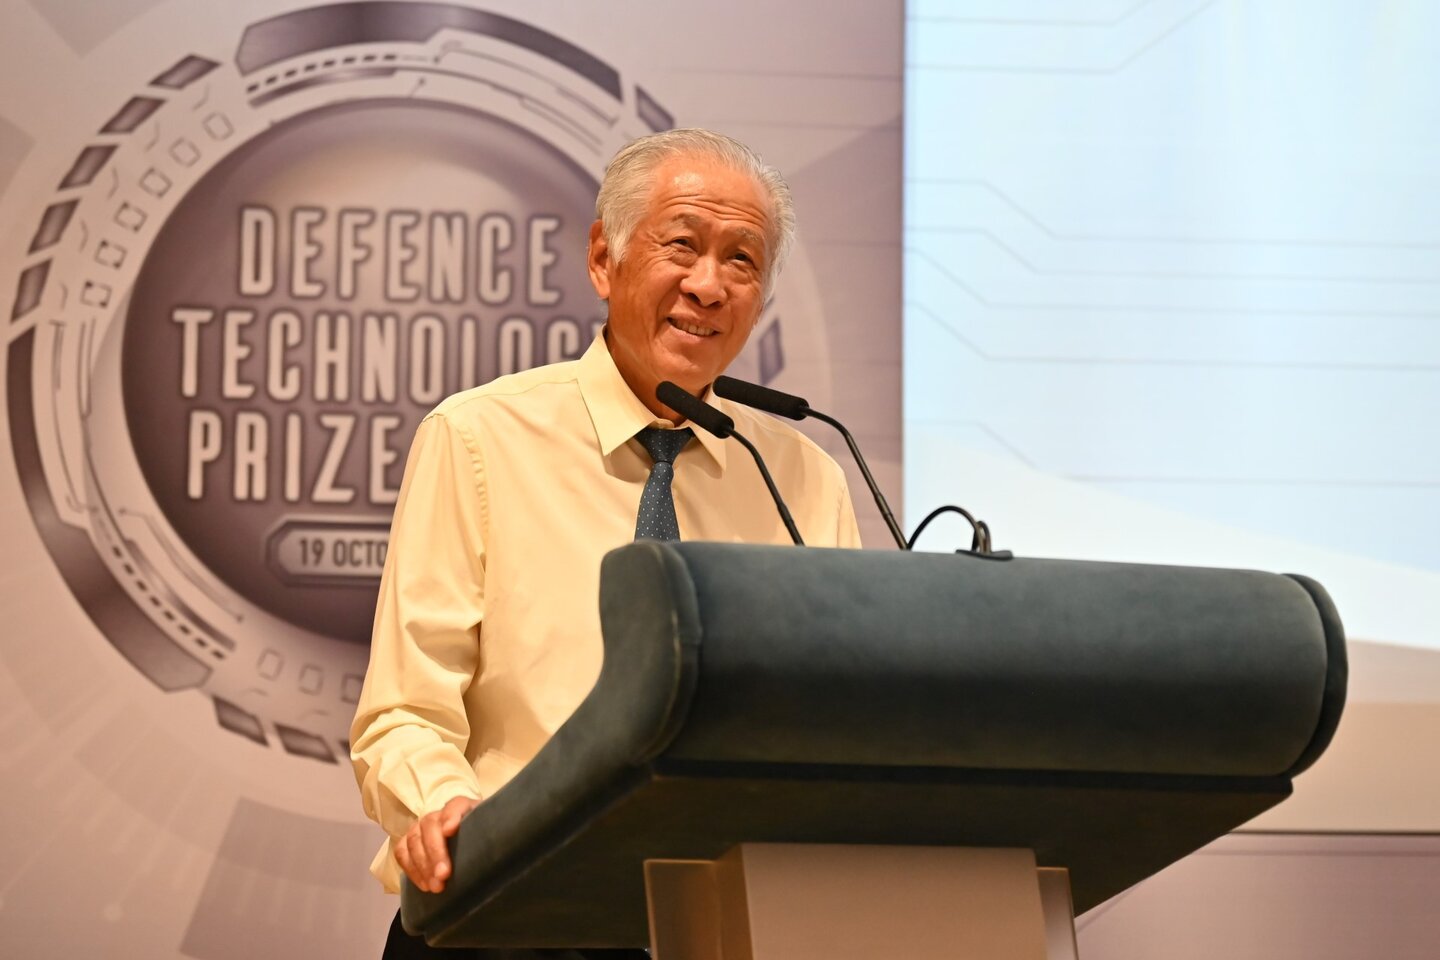 Dr Ng Eng Hen speaking at the Defence Technology Prize Award Ceremony